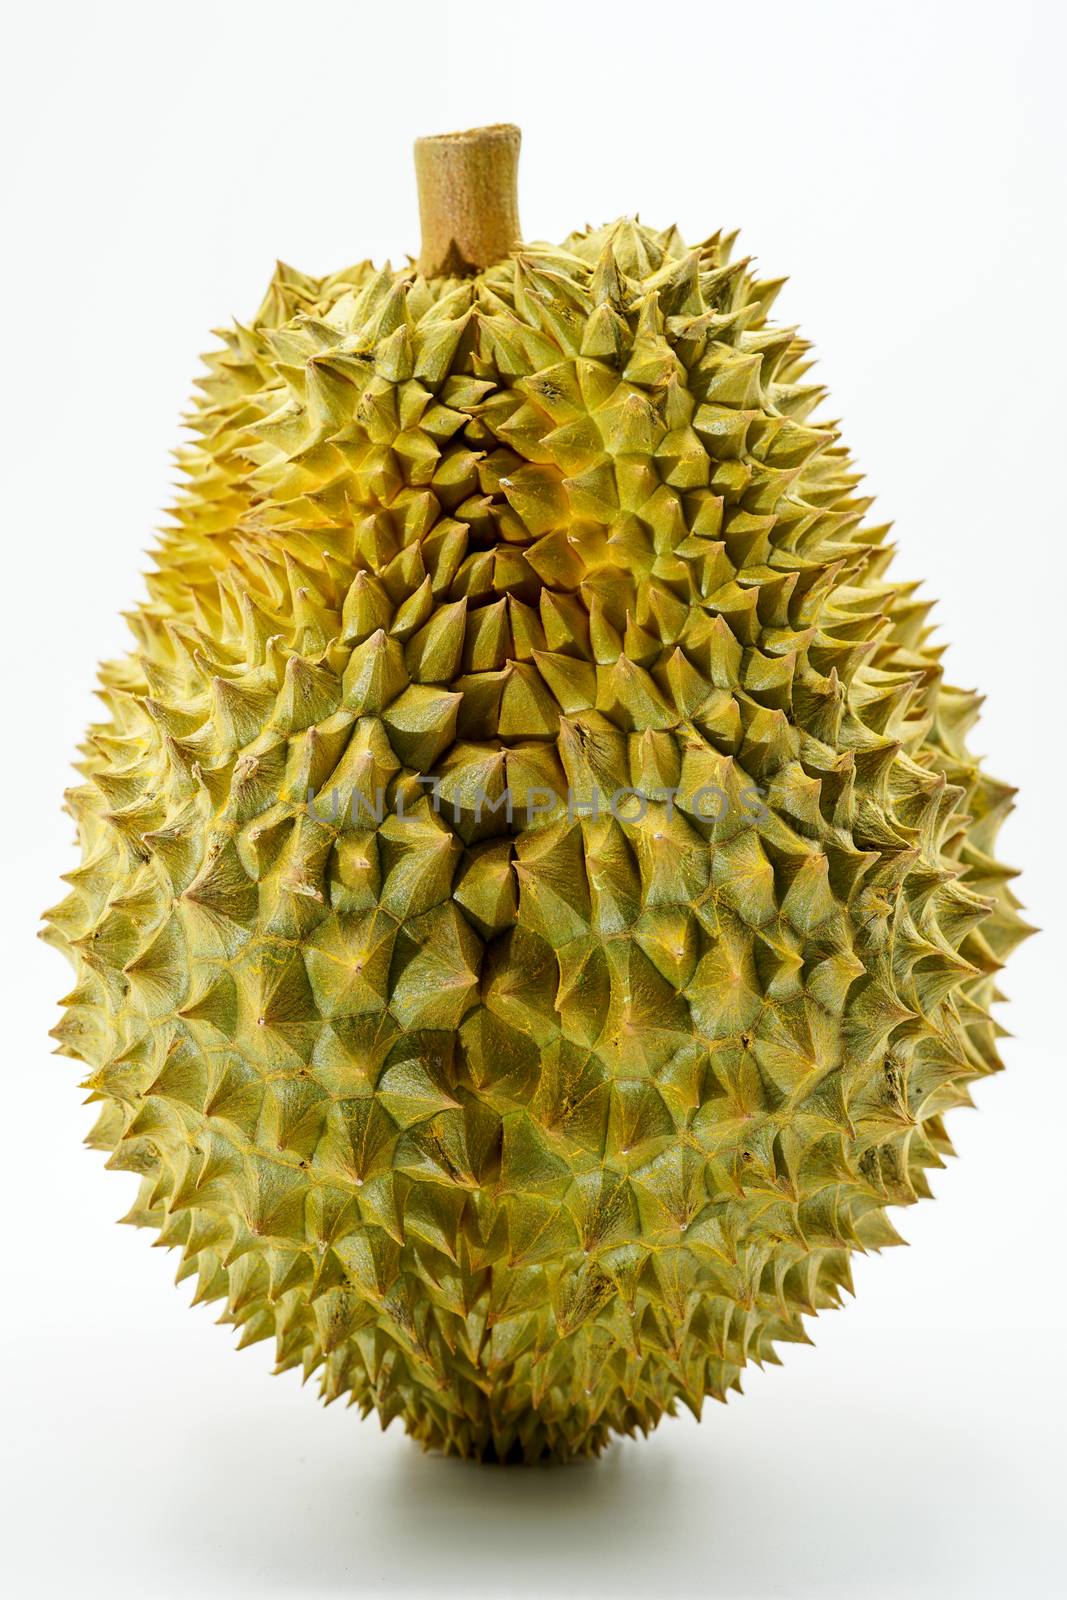 Fresh Cut Monthong Durian on white background,closeup view of Du by psodaz